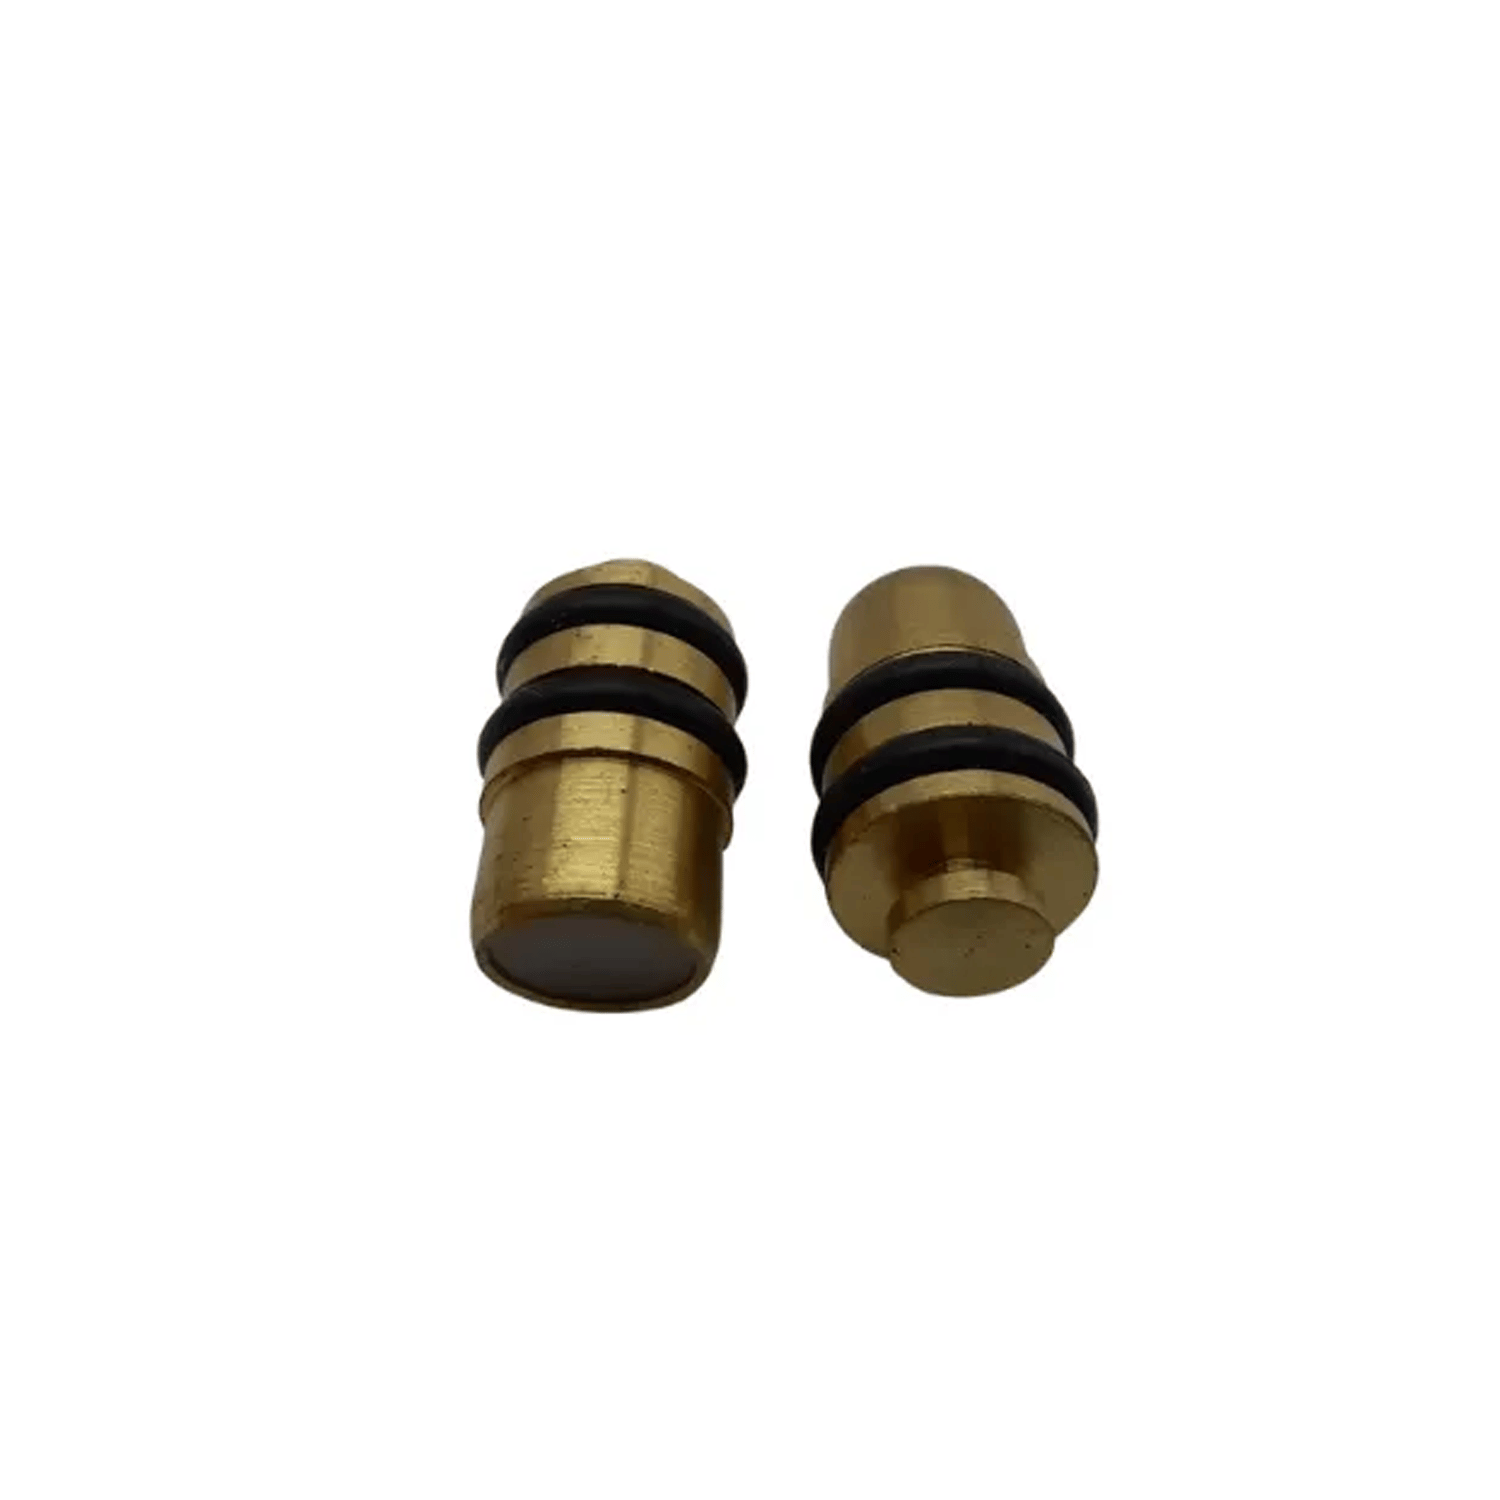 Piston seal and bottom for brass manifold